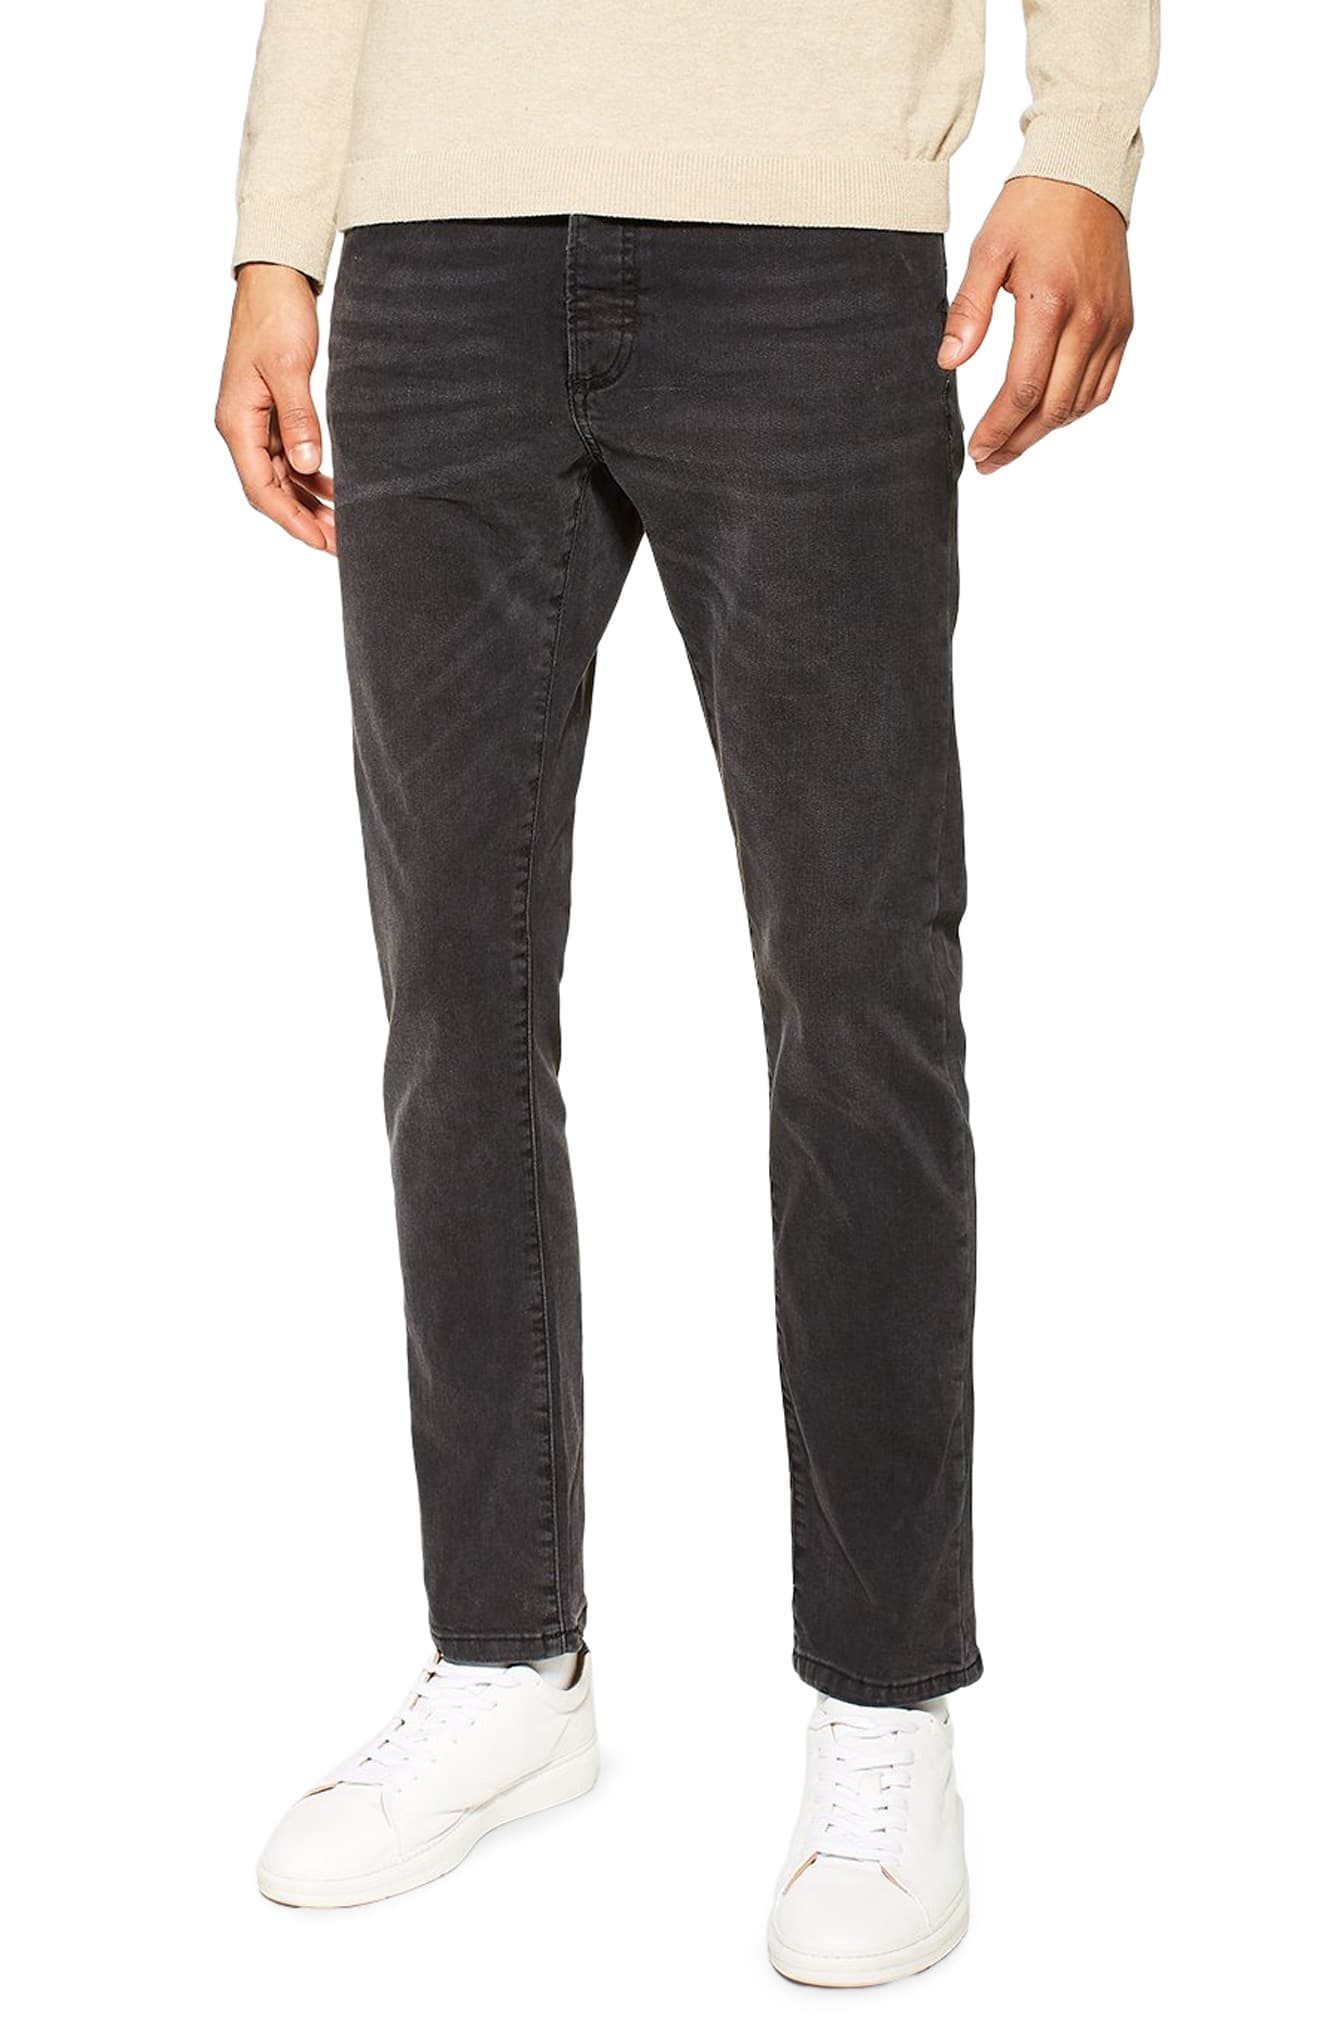 Men’s Topman Washed Stretch Slim Fit Jeans, Size 36 x 34 – Black | The ...